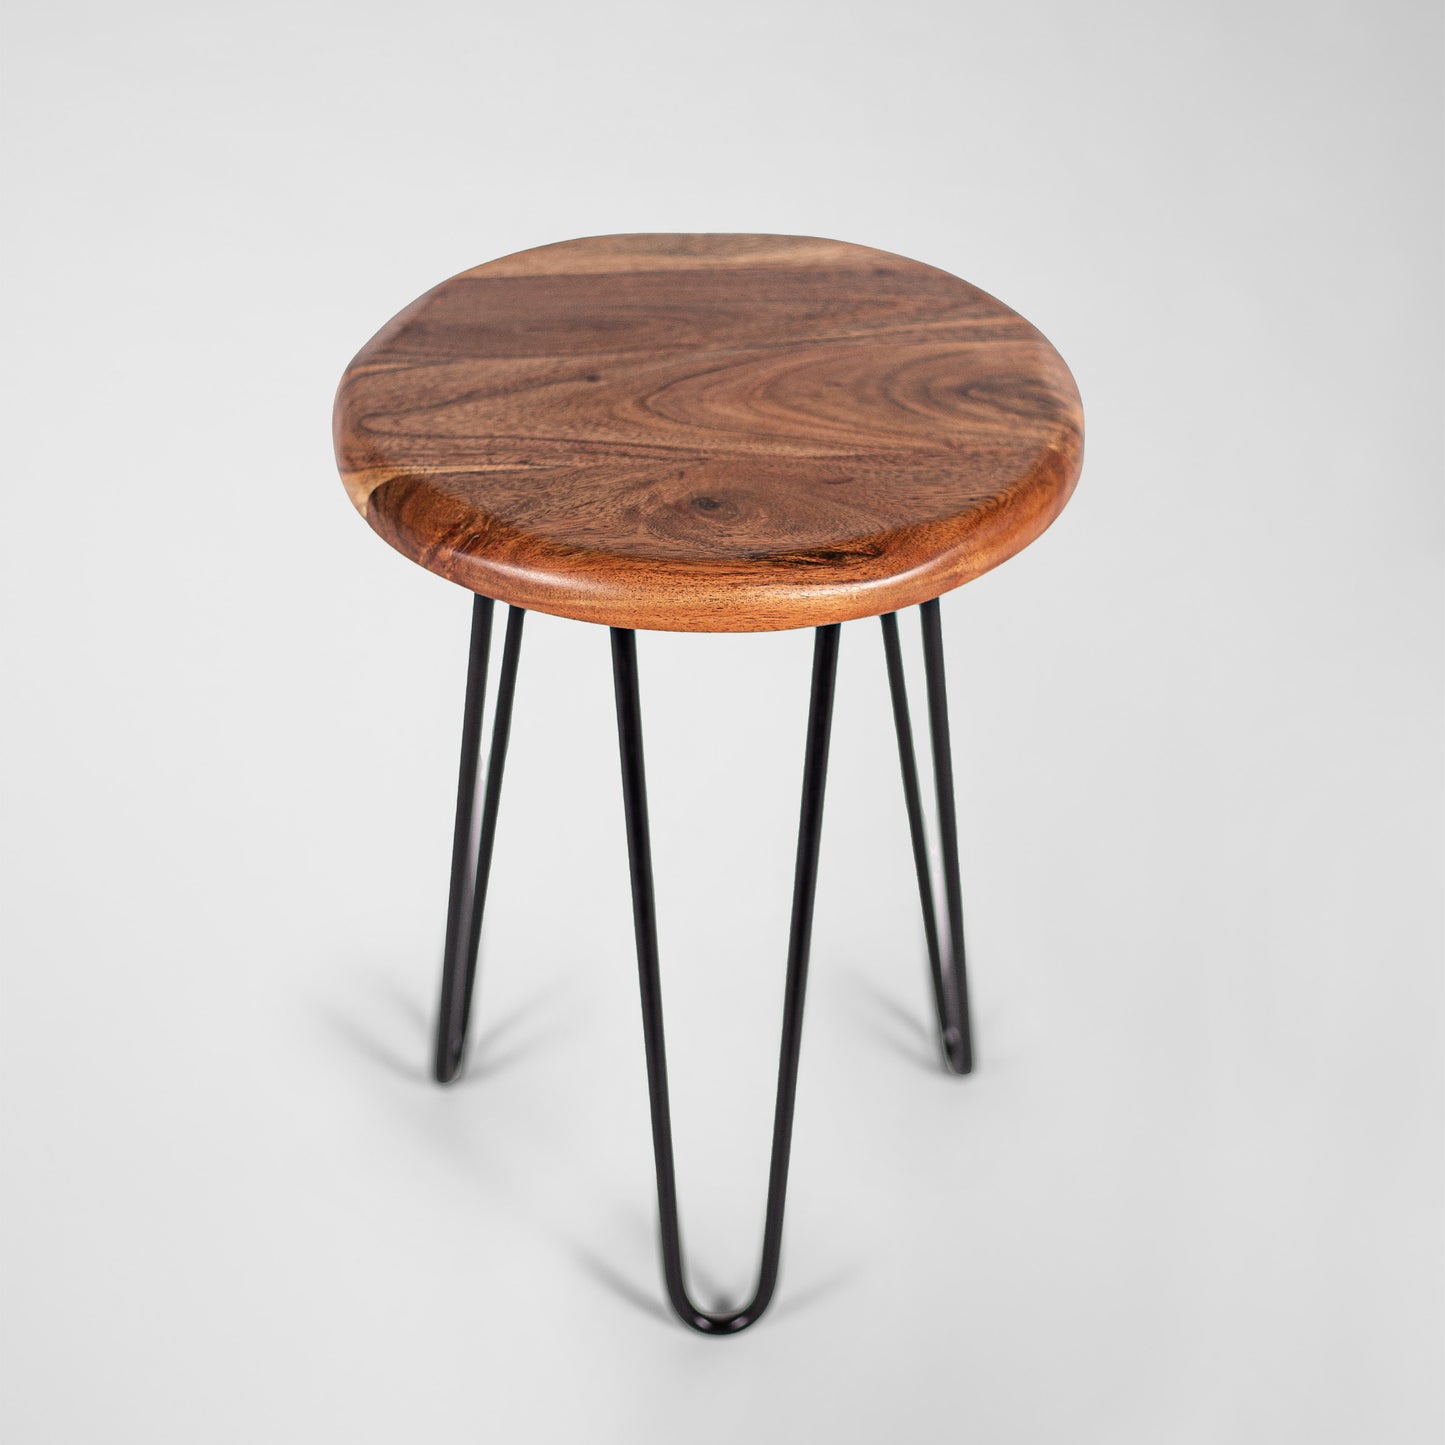 HairPin 103 – industrial design stool made of metal with wooden seat in black or copper